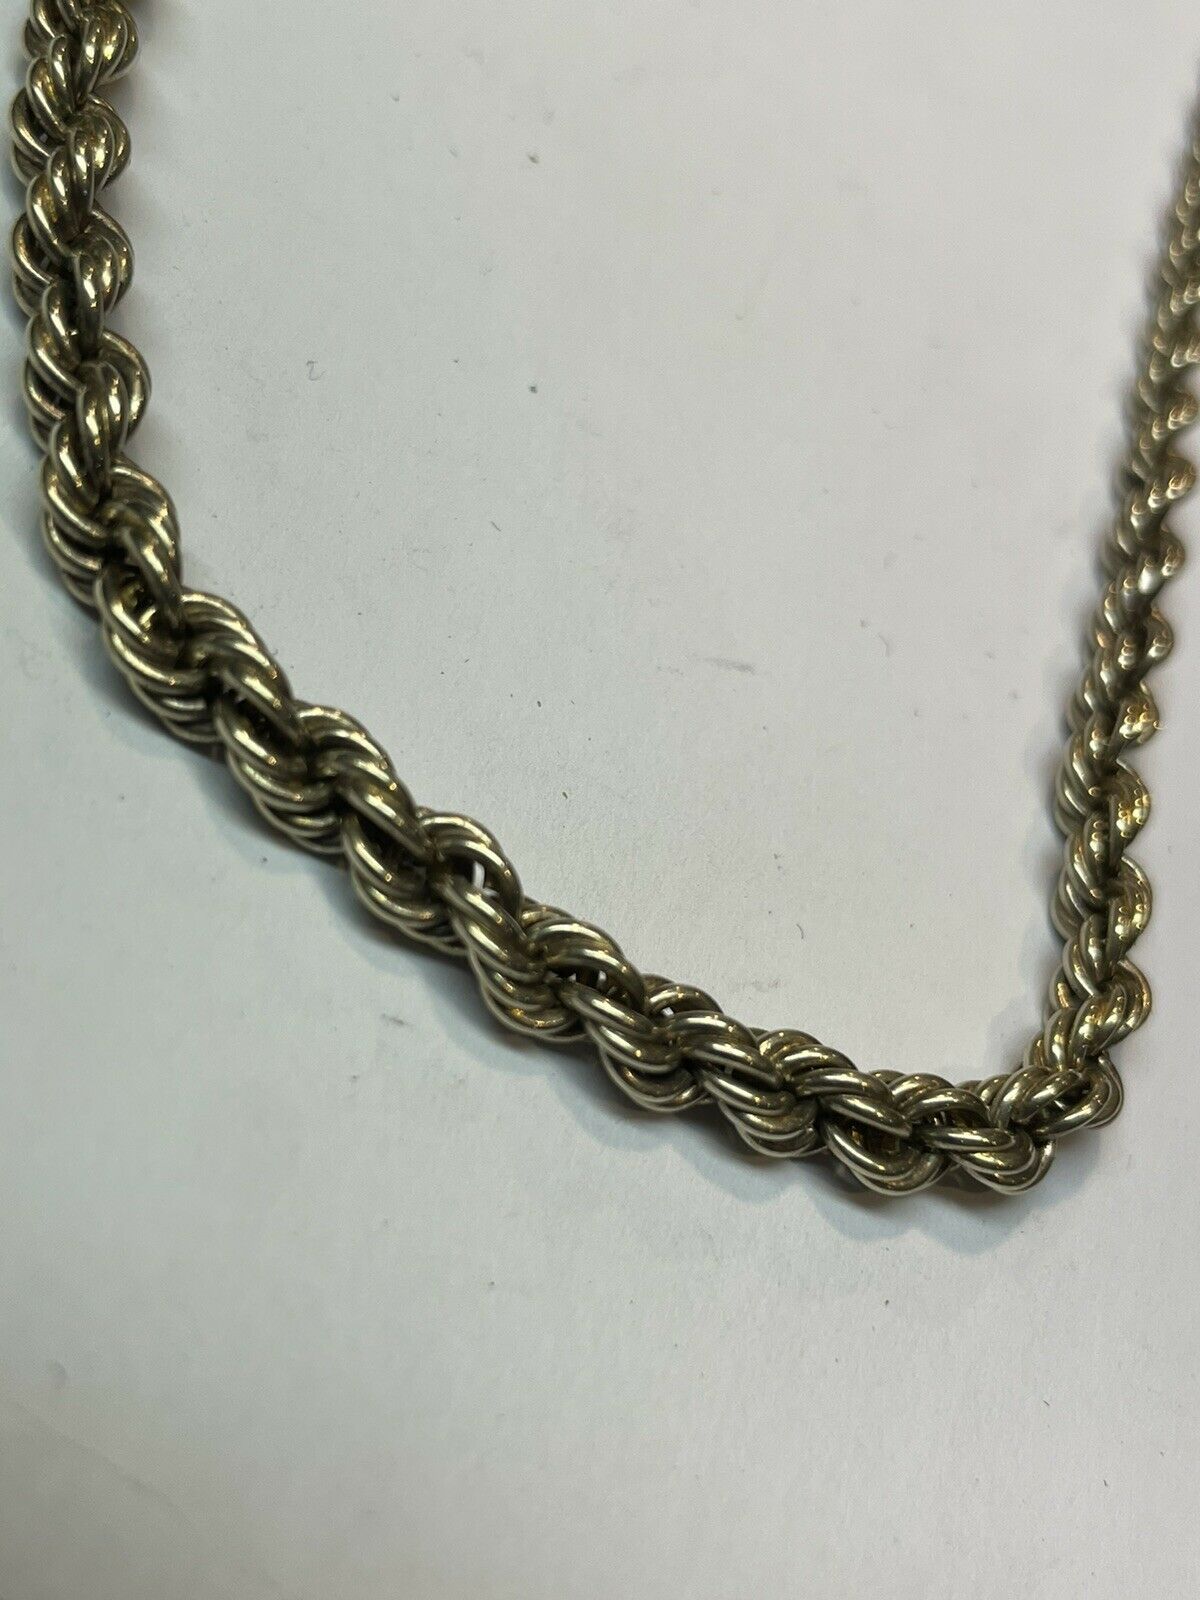 Vintage ORIGINAL RUSSIAN Gold Plated Sterling Silver 875  ROPE Necklace 18” long